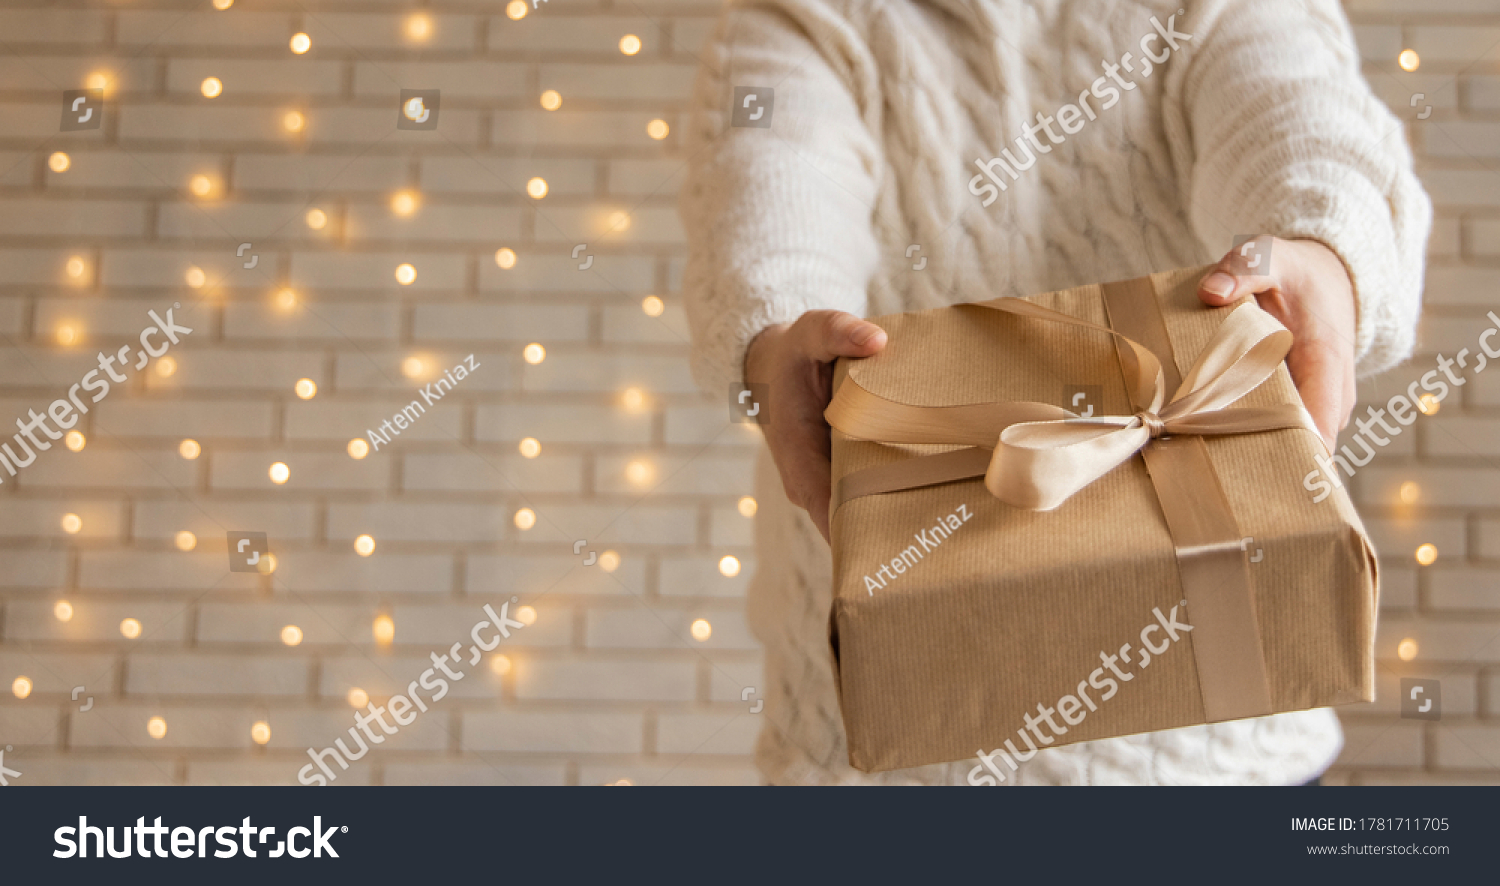 Christmas gift in man hands holiday wallpaper poster concept picture with white wall background and garland illumination lamps  #1781711705